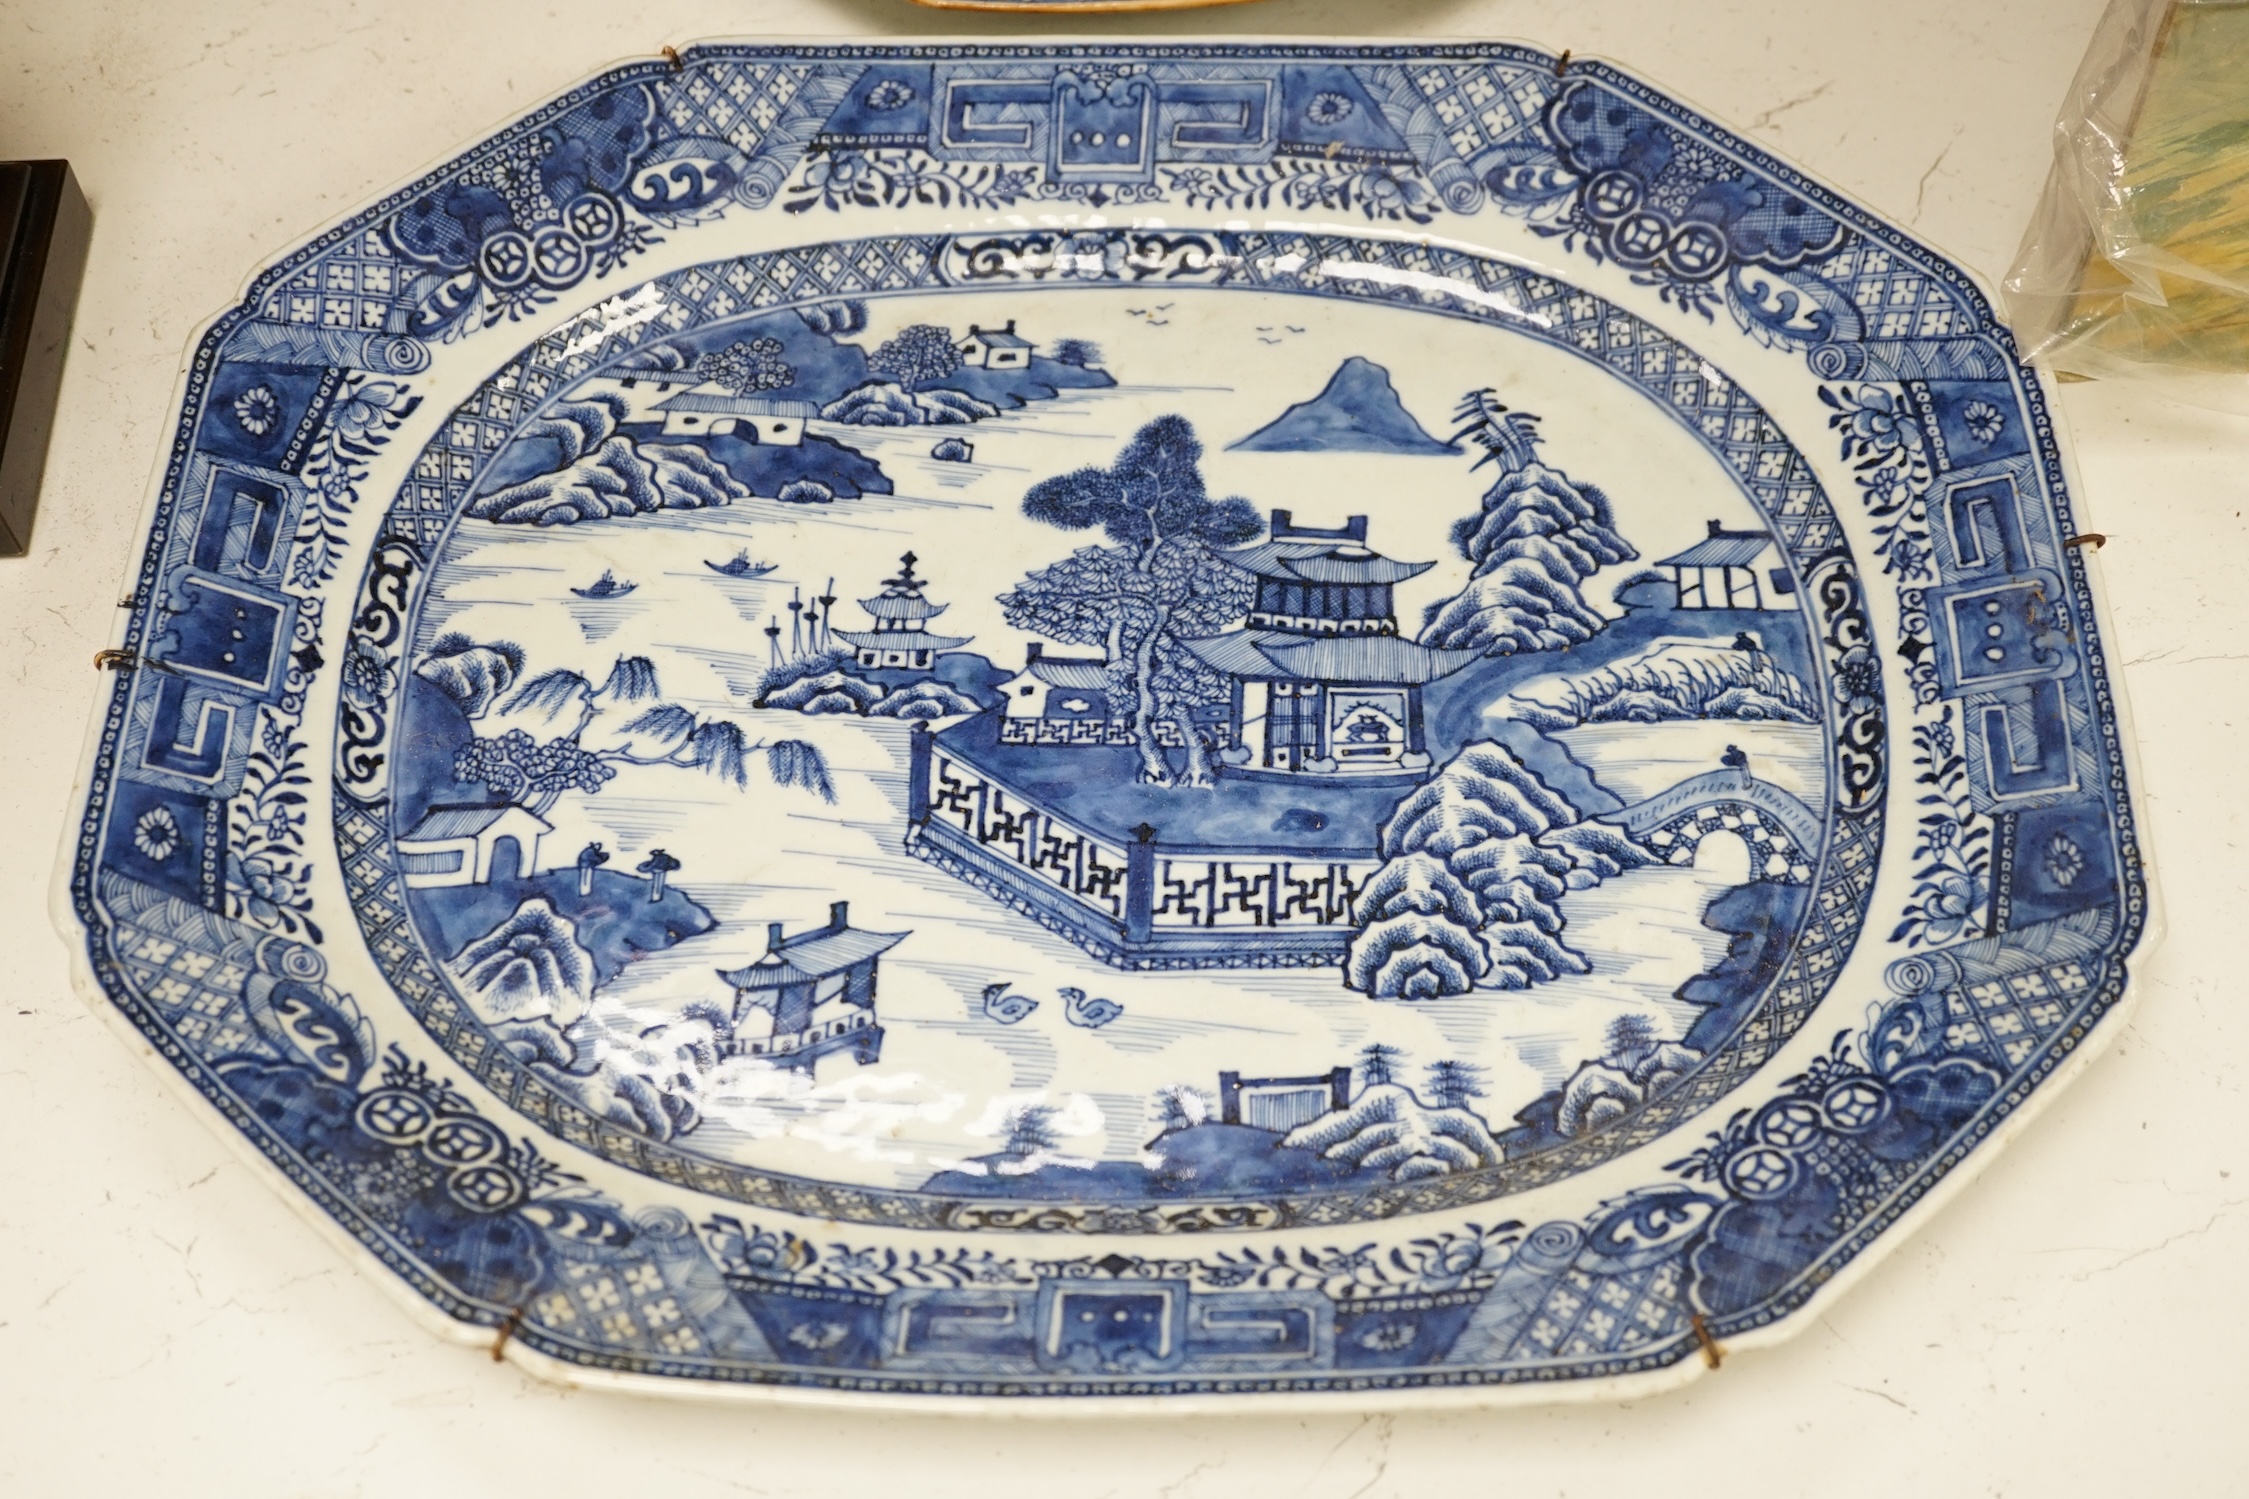 Two 18th century Chinese blue and white dishes, largest 44.5cm long. Condition - fair